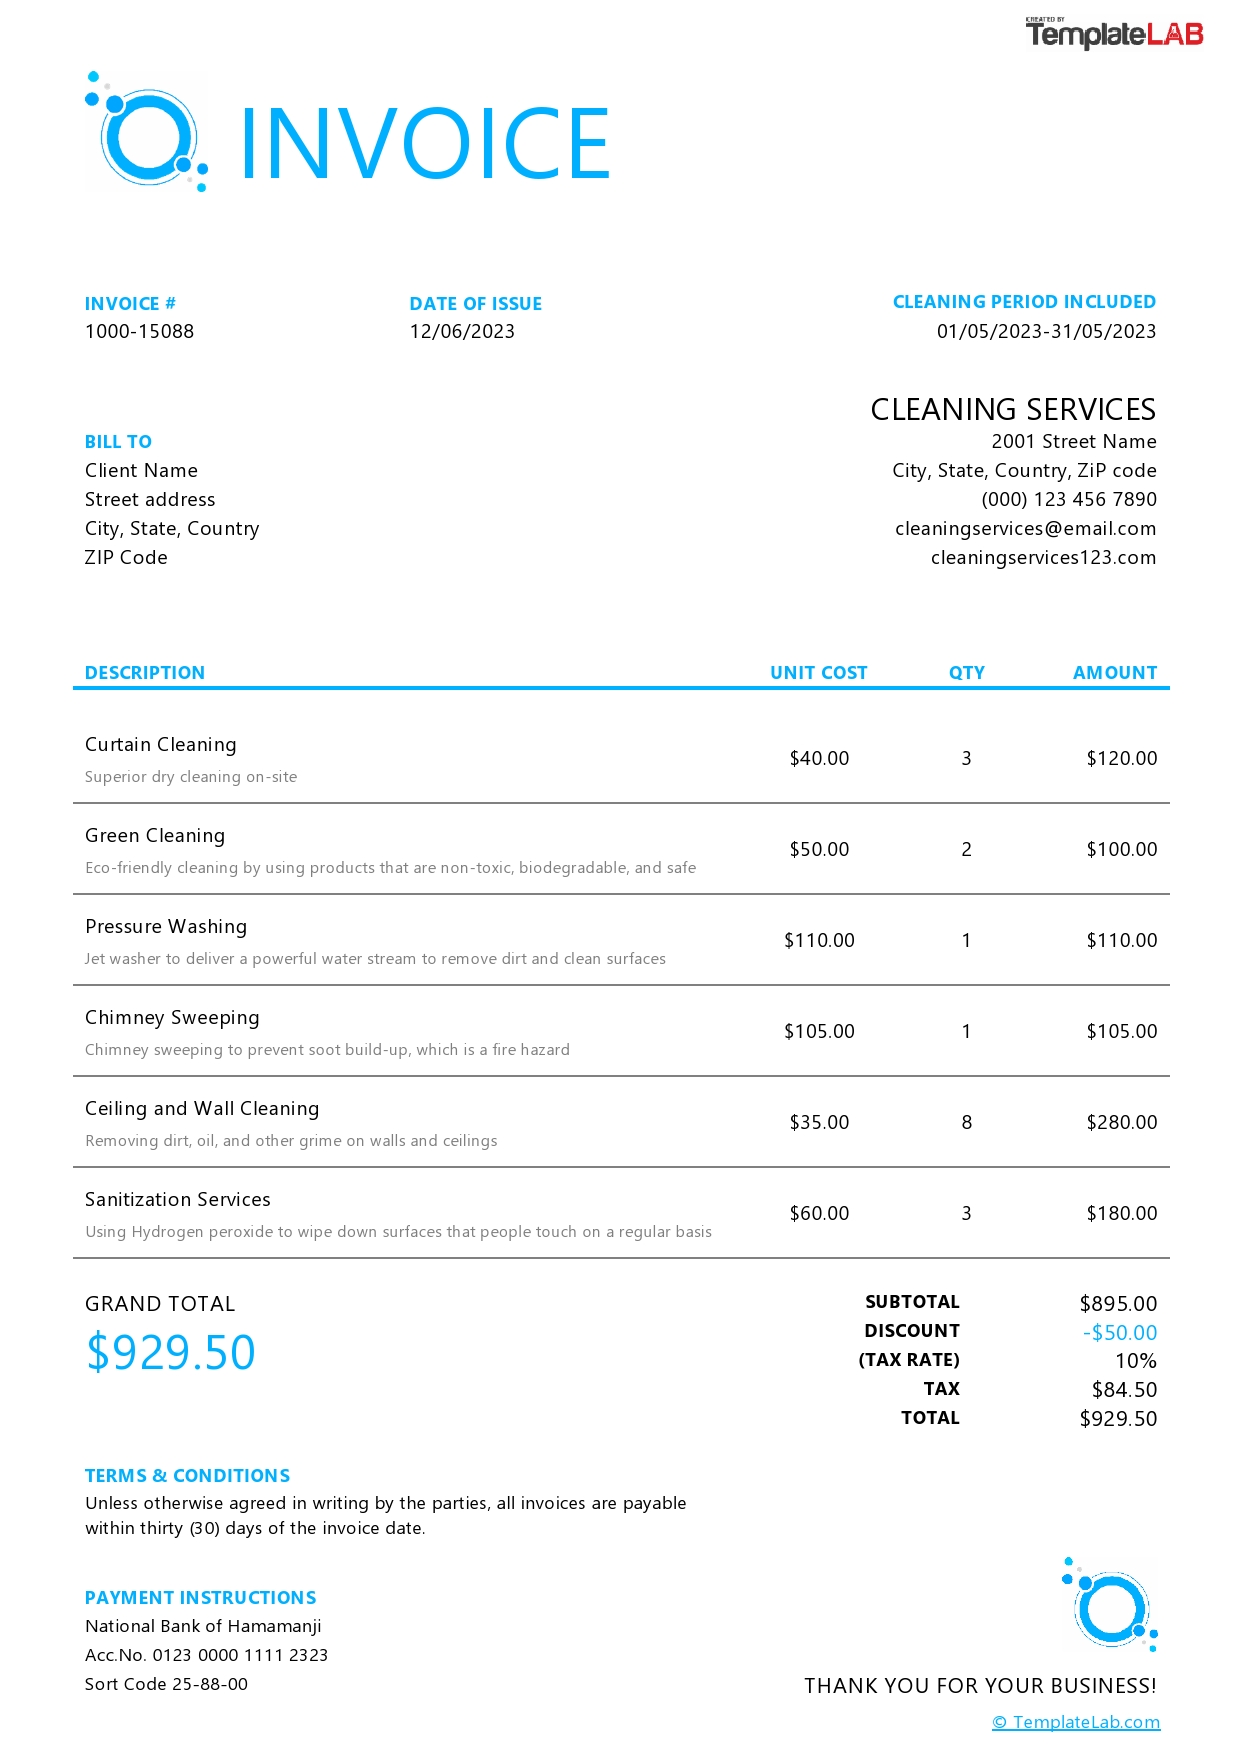 How To Write An Invoice Email Sample